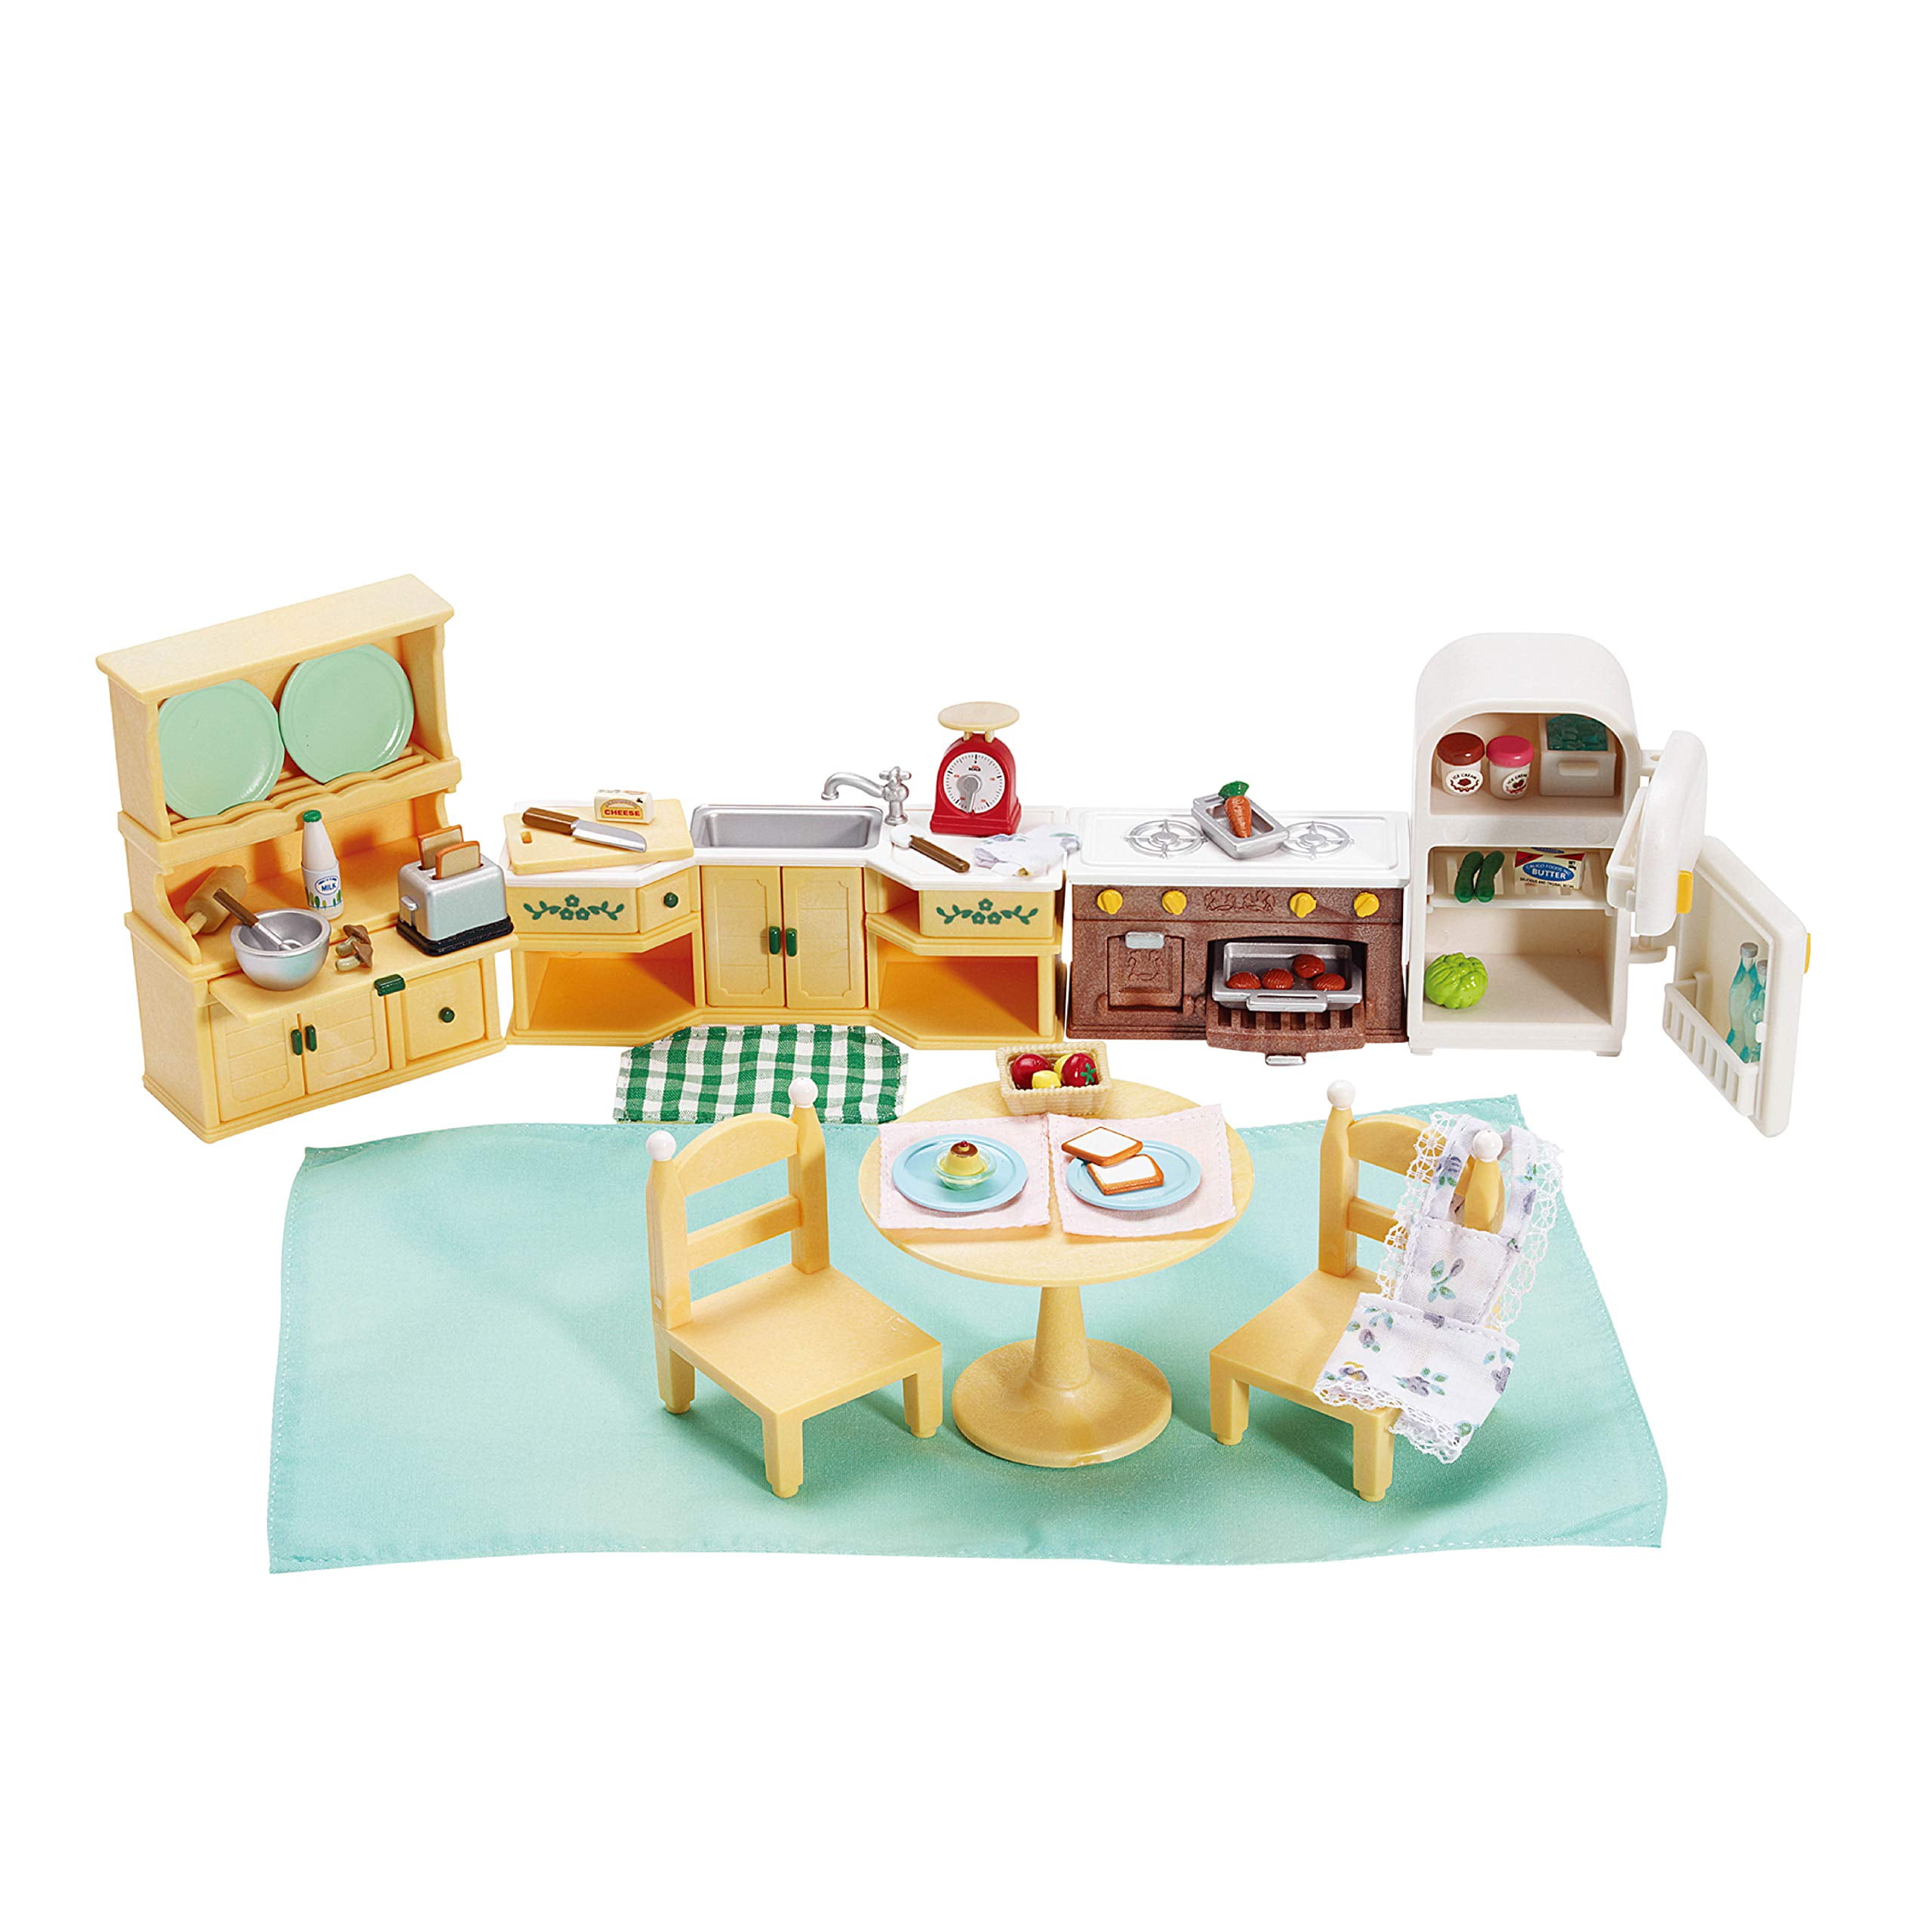 2x Sylvanian Families sheep Family Calico Critters Doll & Oven set dining Kitch 